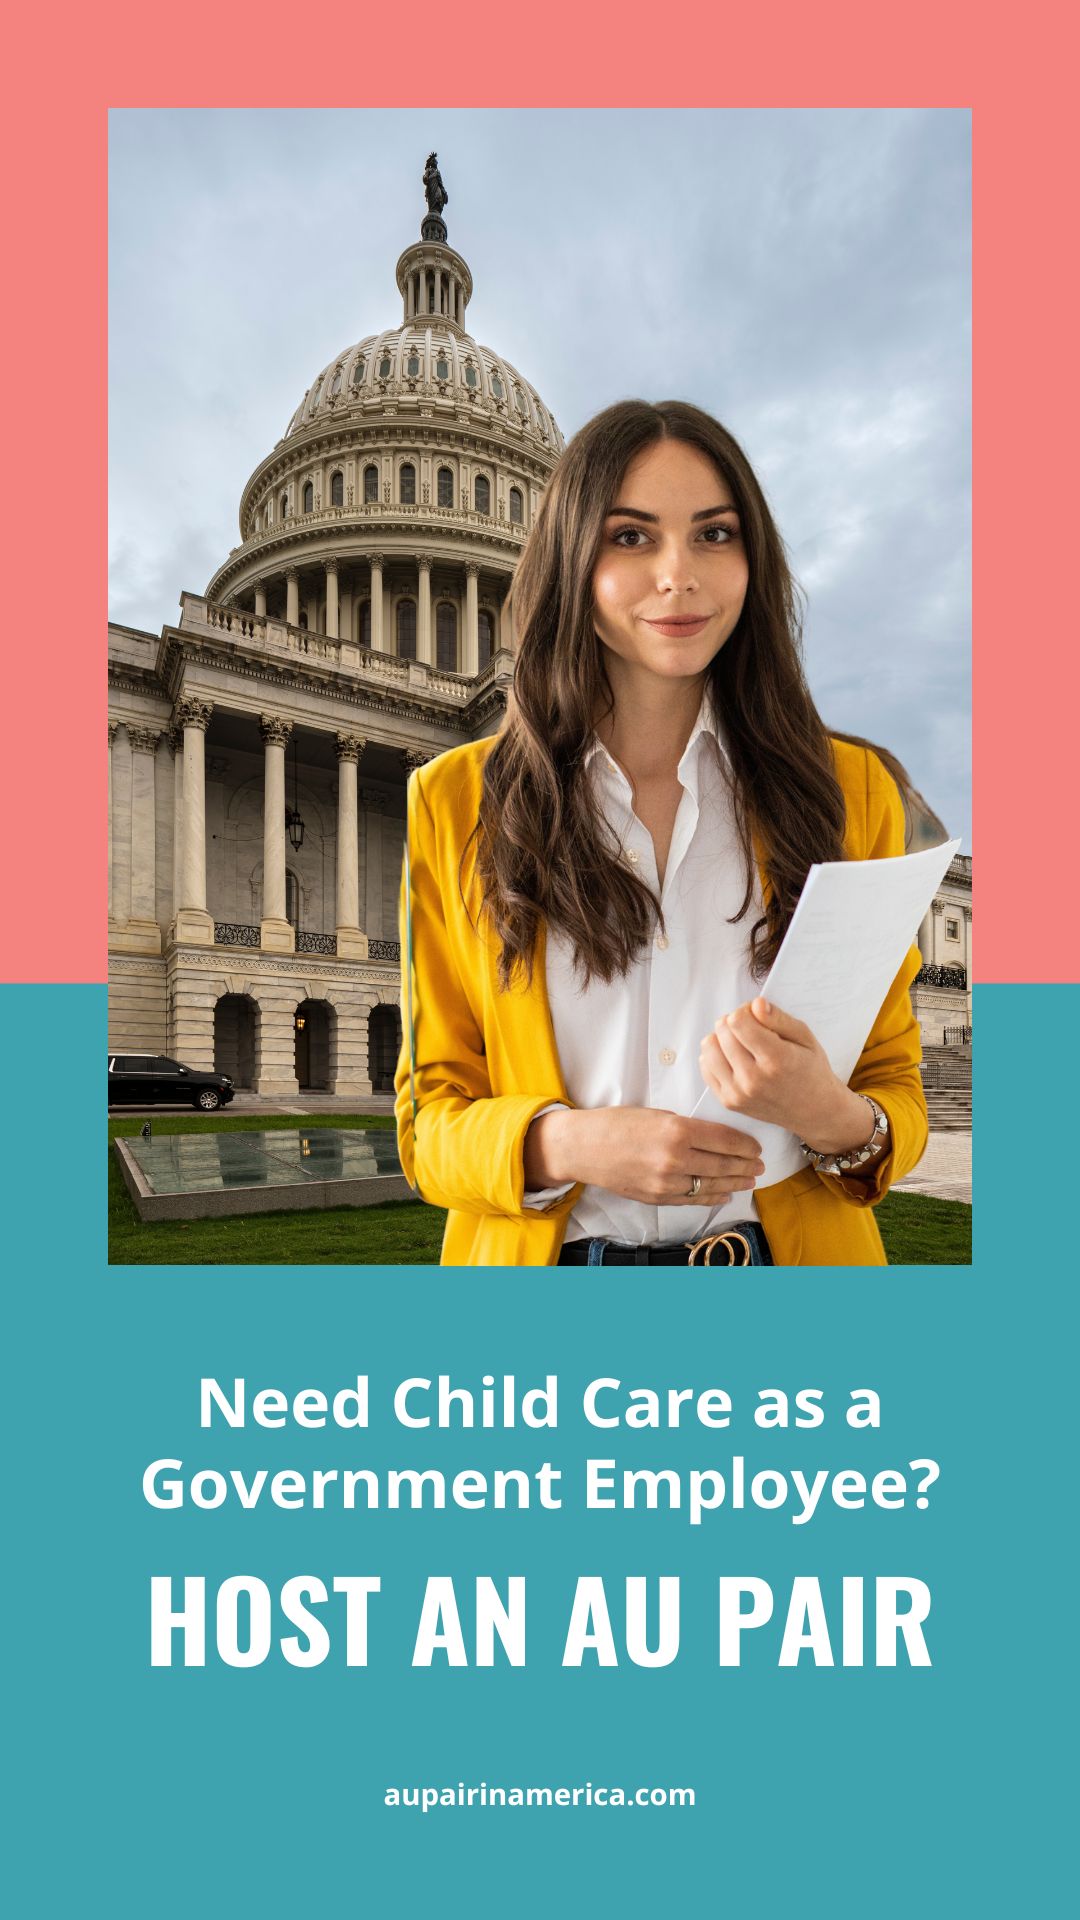 Pin image: Working professional in Washington, DC with text overlay saying "Need Child Care as a Government Employee? Host an Au Pair"